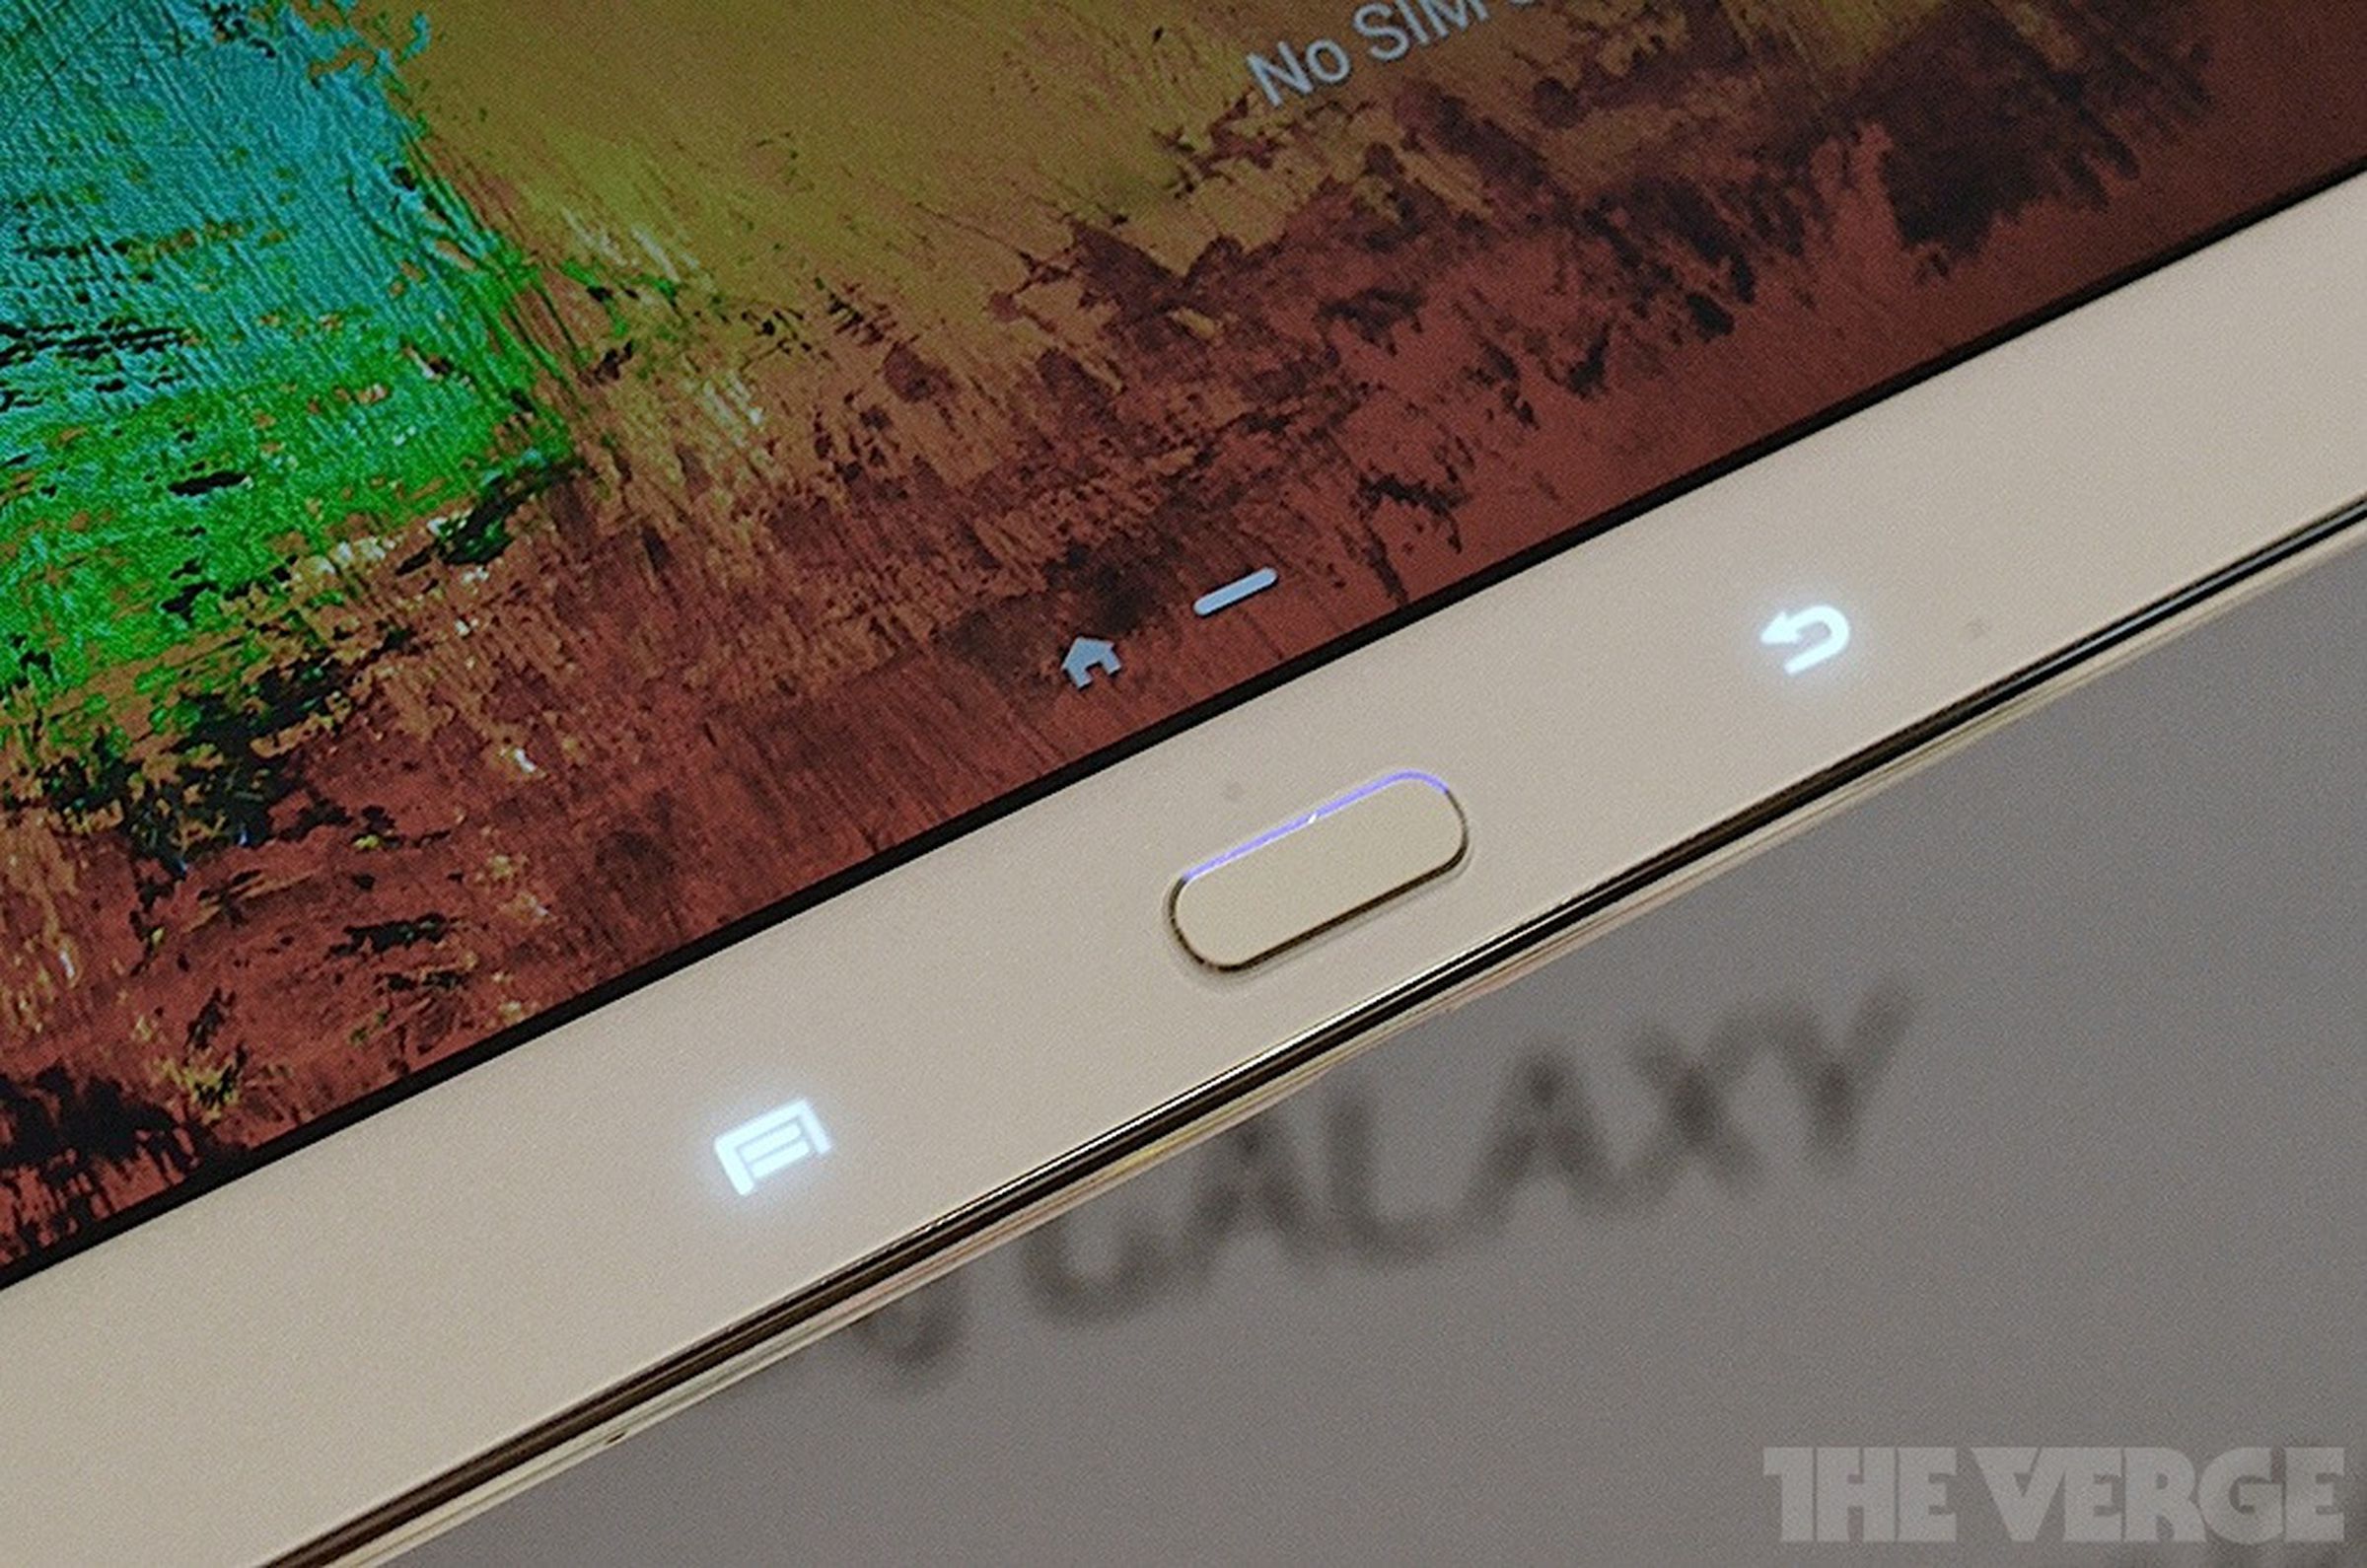 Samsung Galaxy Note 10.1 2014 edition hands-on photos